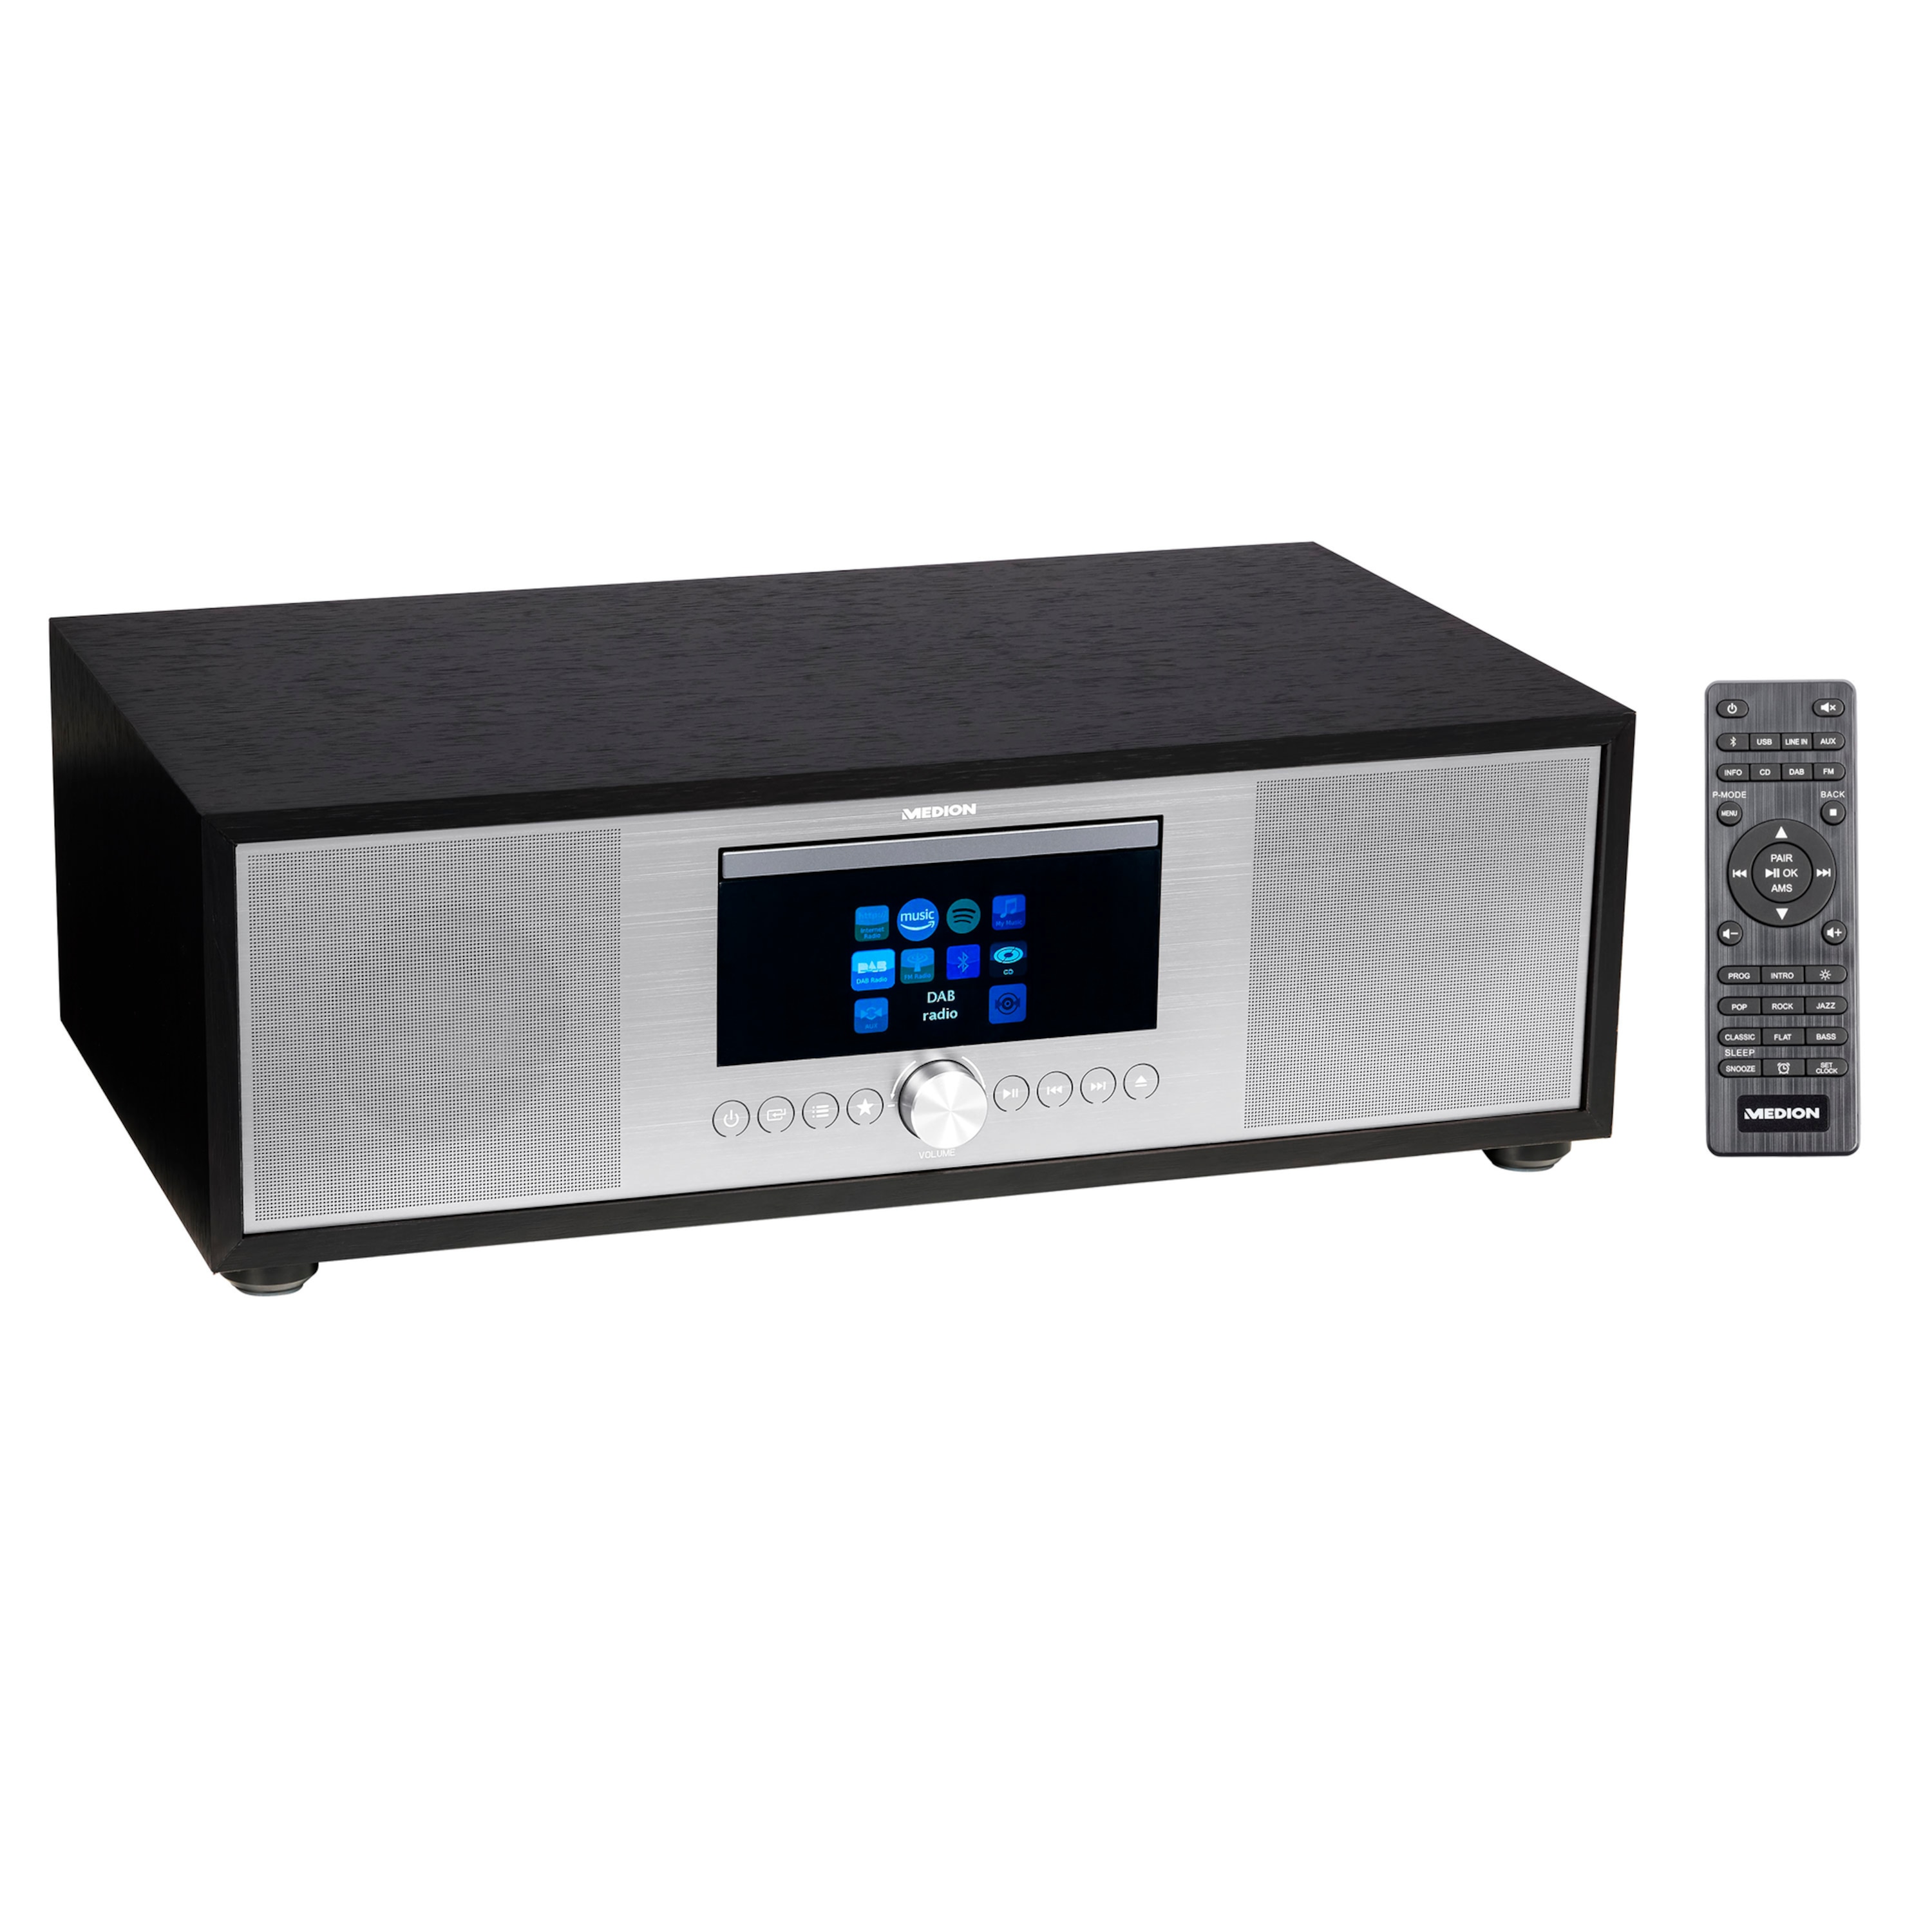 MEDION® LIFE® P66024 All-in-One Audio System, LCD-Display 7,1 (2.8''), Internet/DAB+/PLL-UKW Radio, CD/MP3-Player, Bluetooth® 5.0, DLNA,  2.1 Soundsystem, 2 x 20 W + 40 W RMS